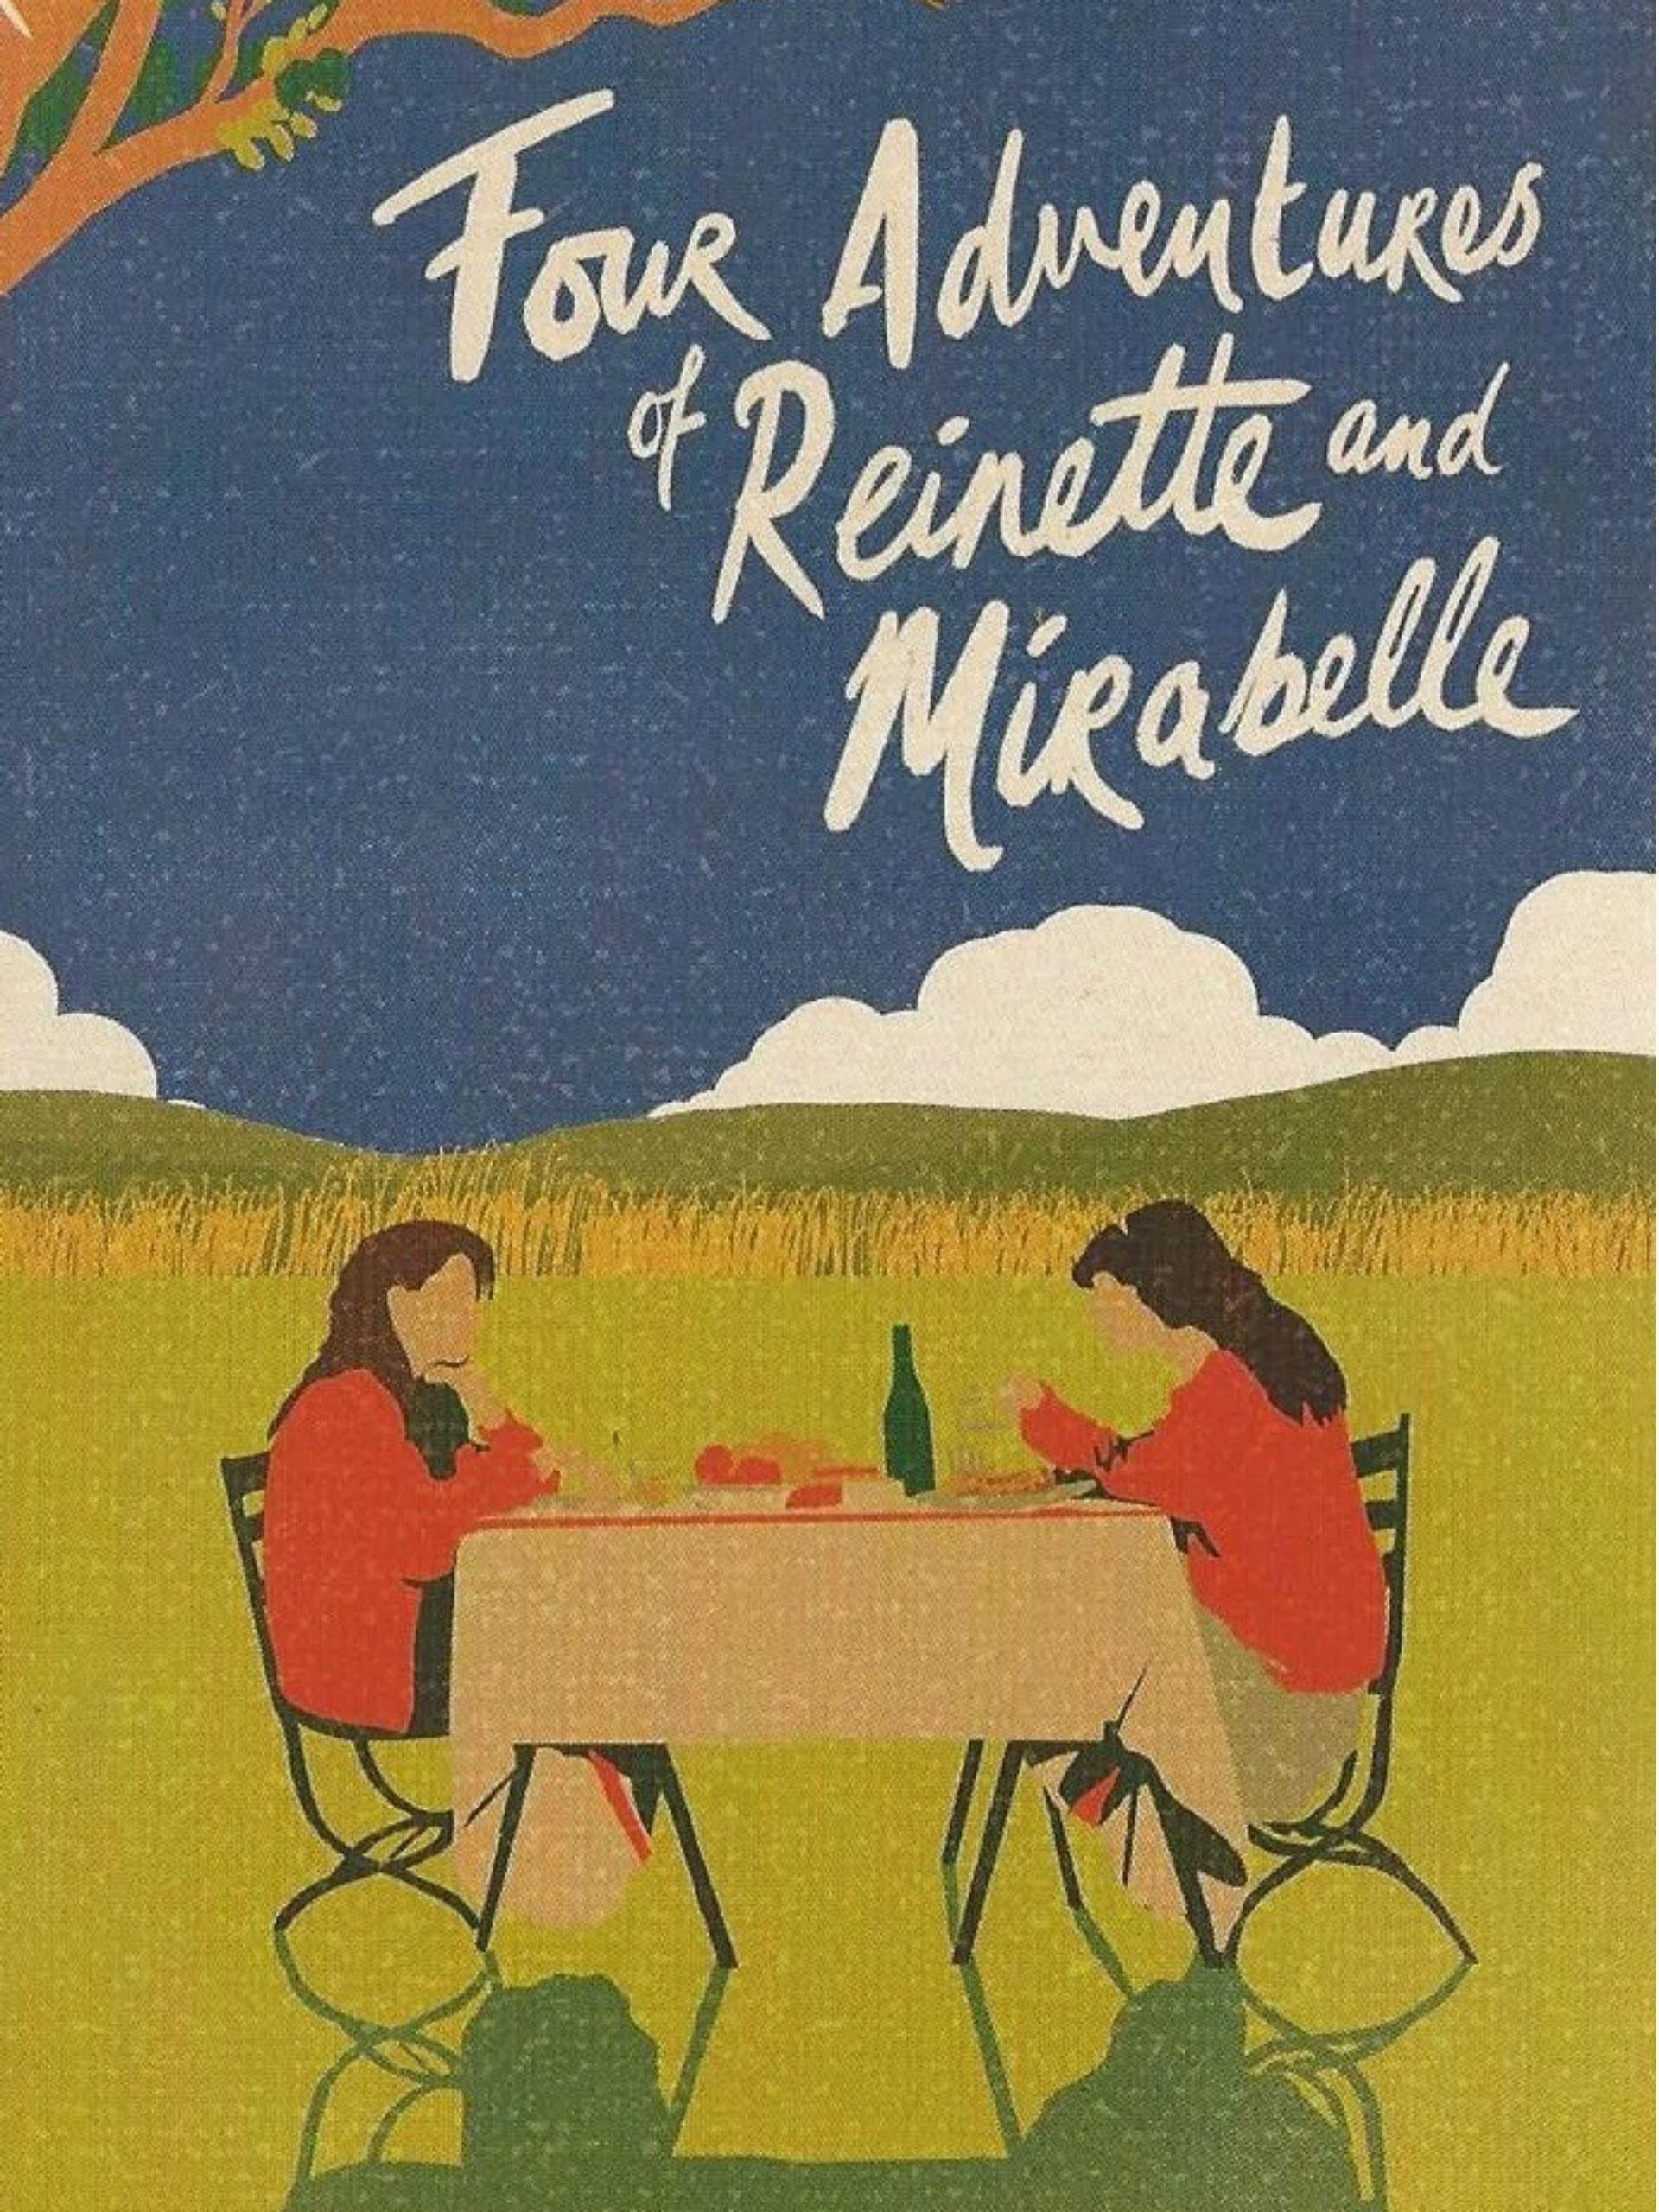 Four Adventures of Reinette and Mirabelle poster